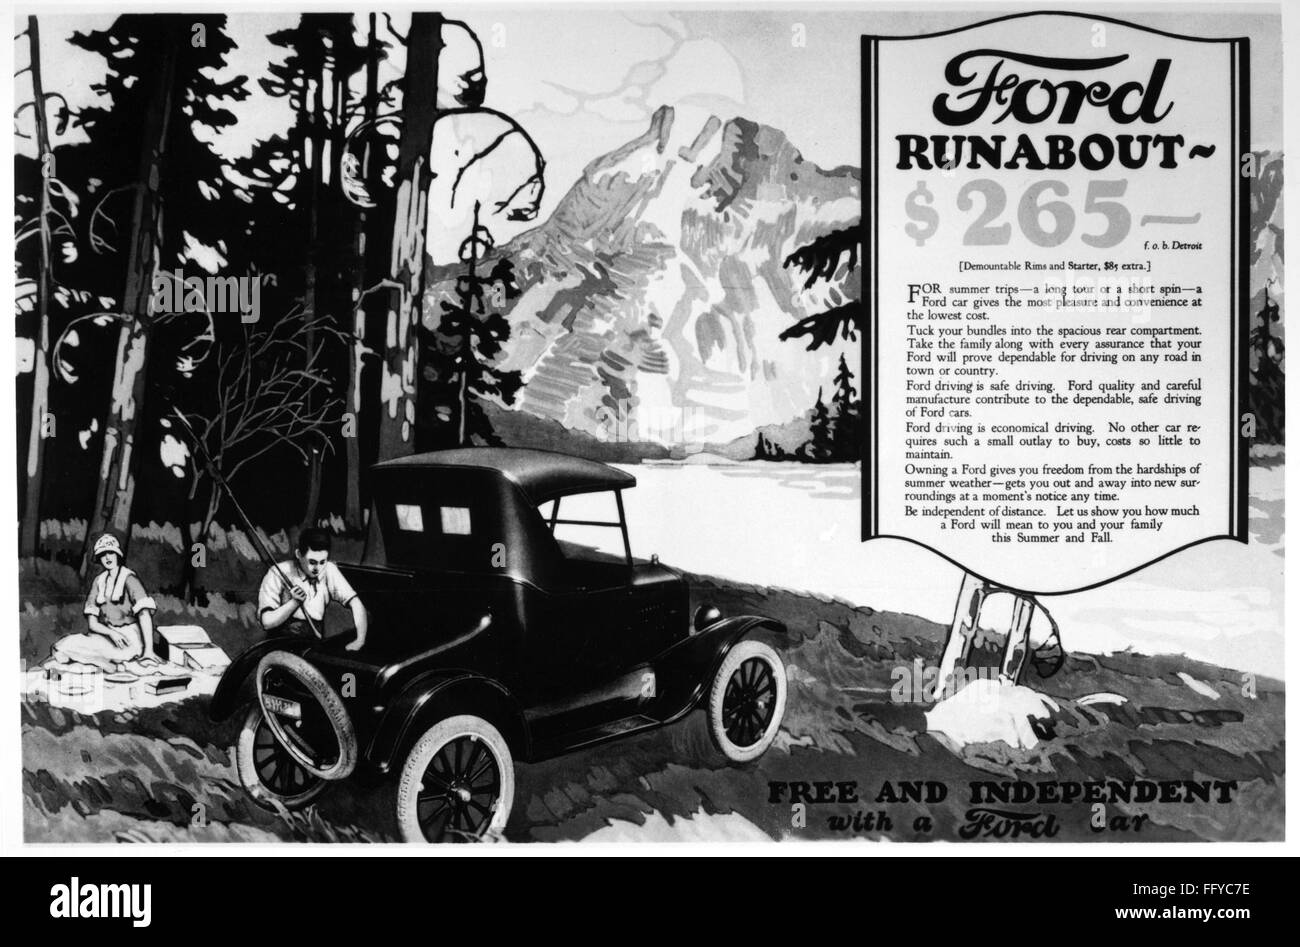 FORD ADVERTISEMENT, 1920s. /nAmerican advertisement for Ford 'Runabout' automobiles, 1920s. Stock Photo